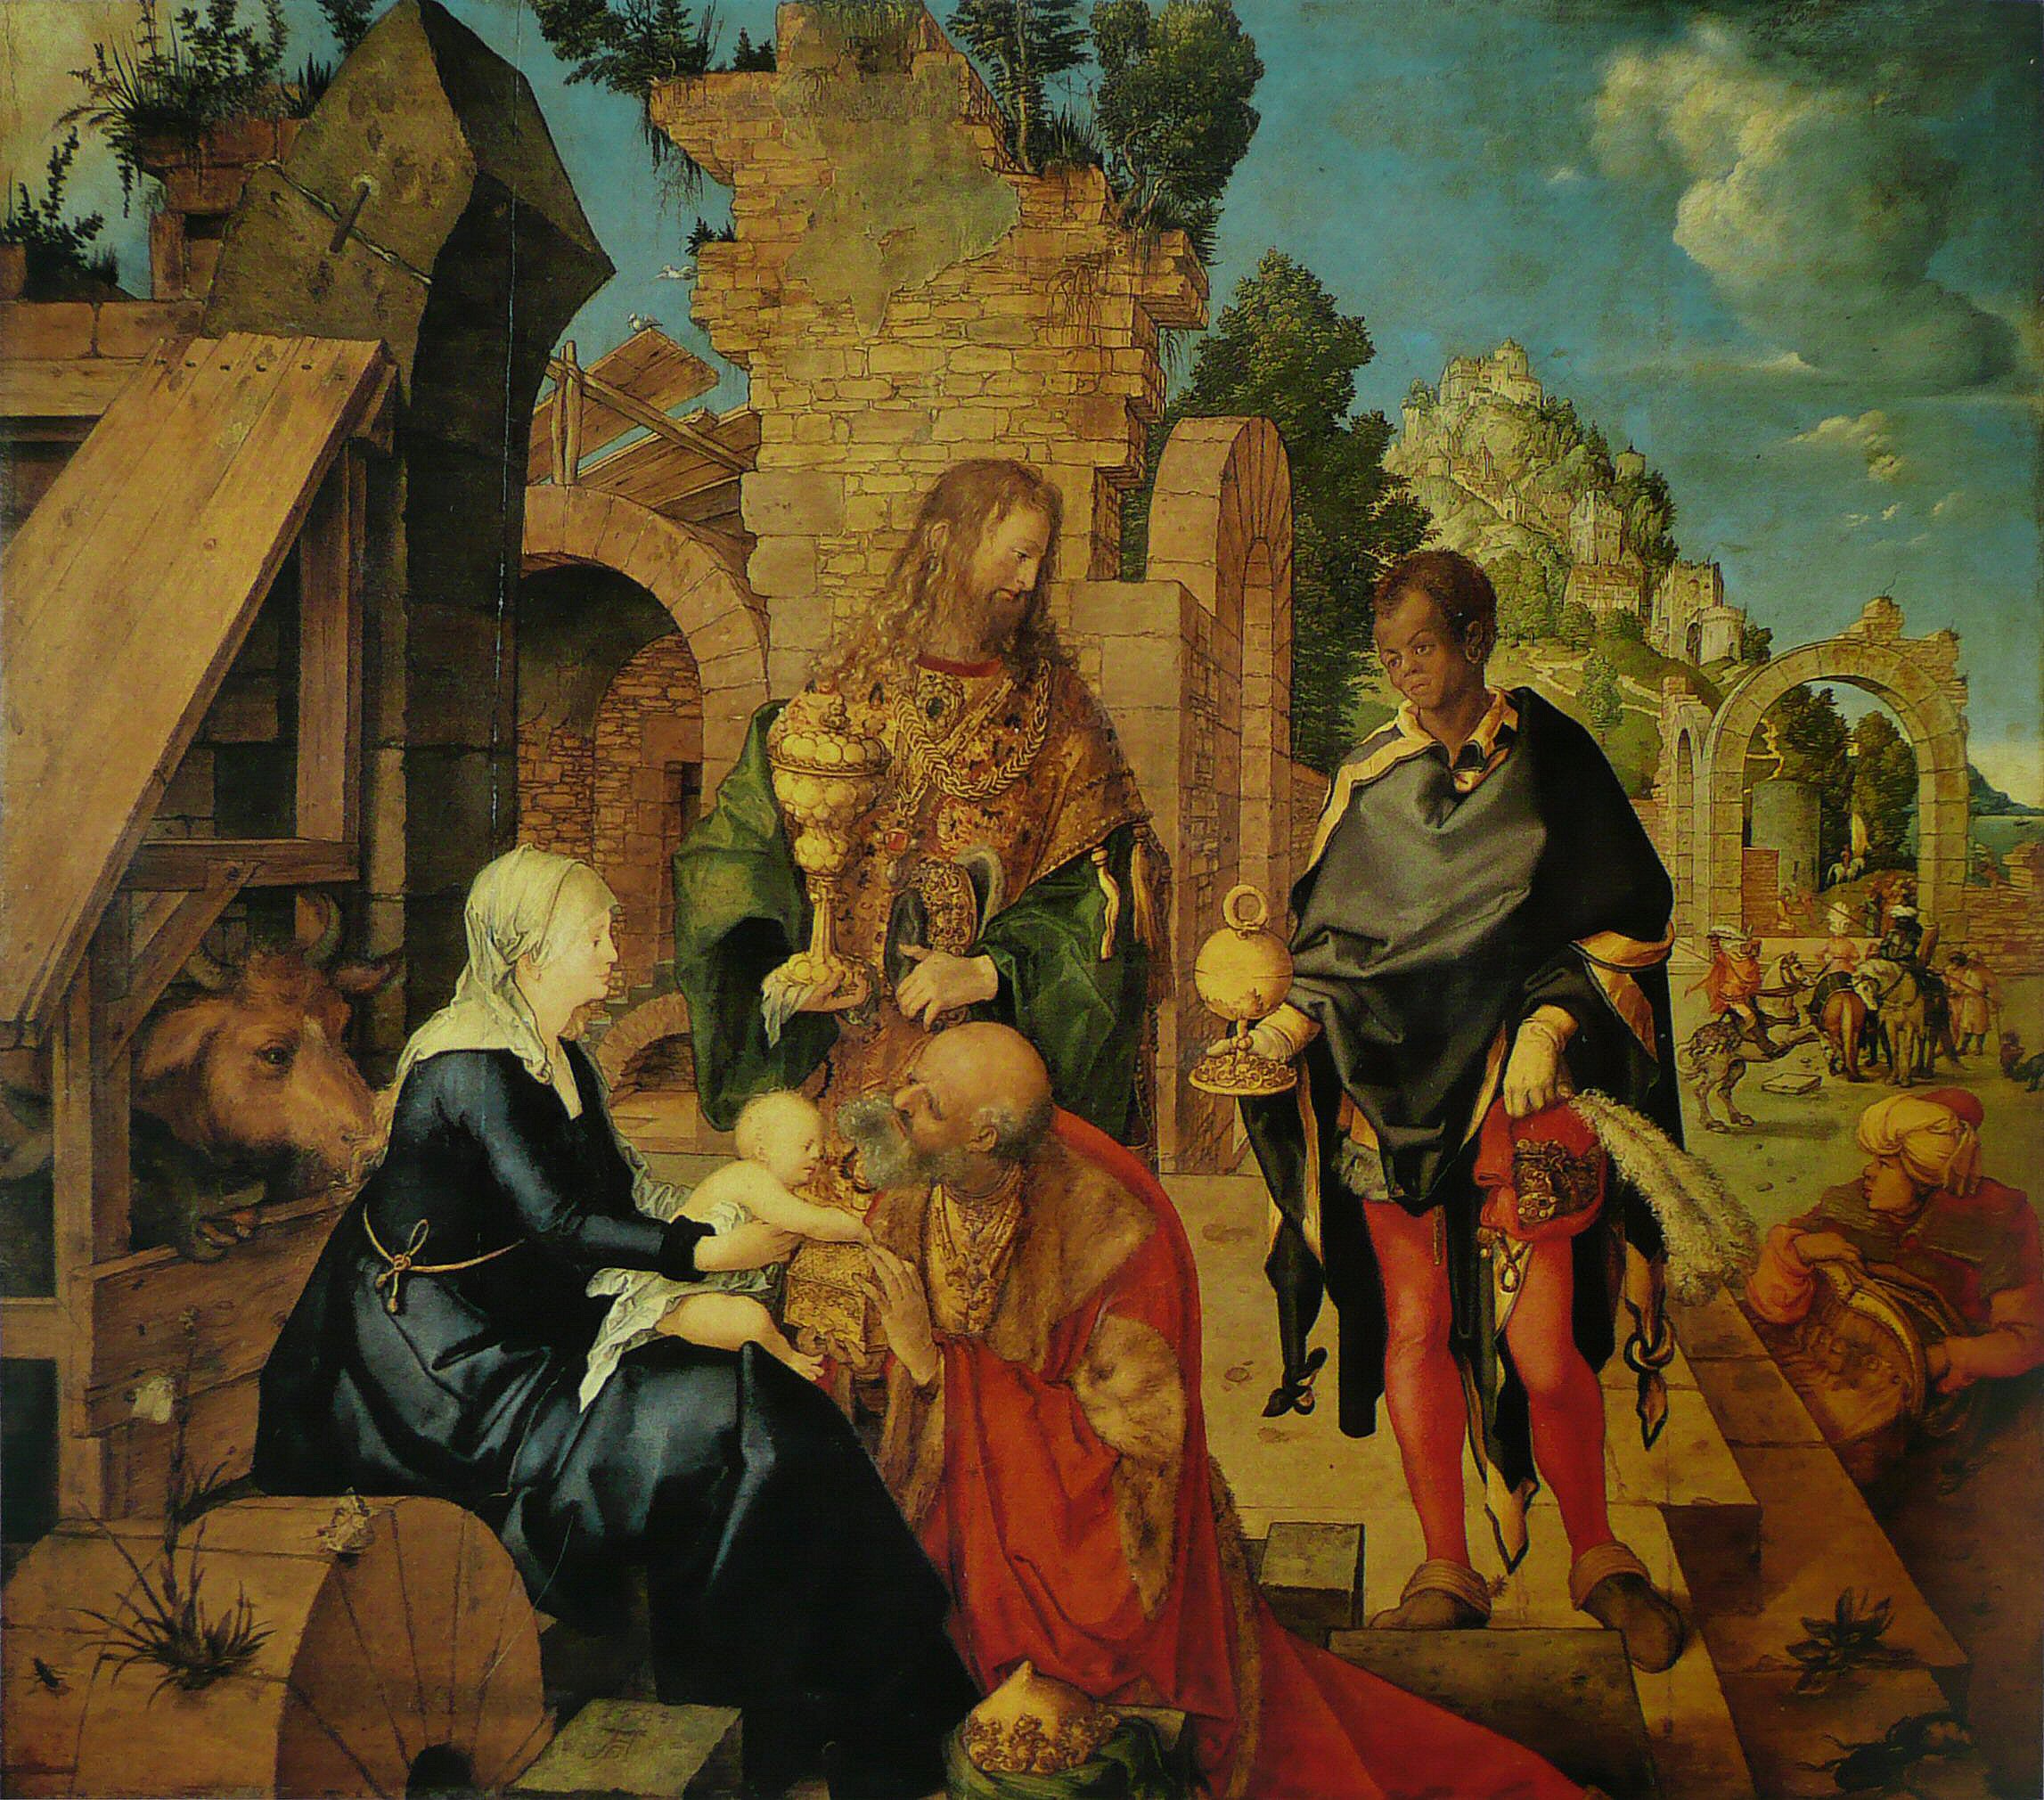 January 7th Service – The Feast of the Epiphany